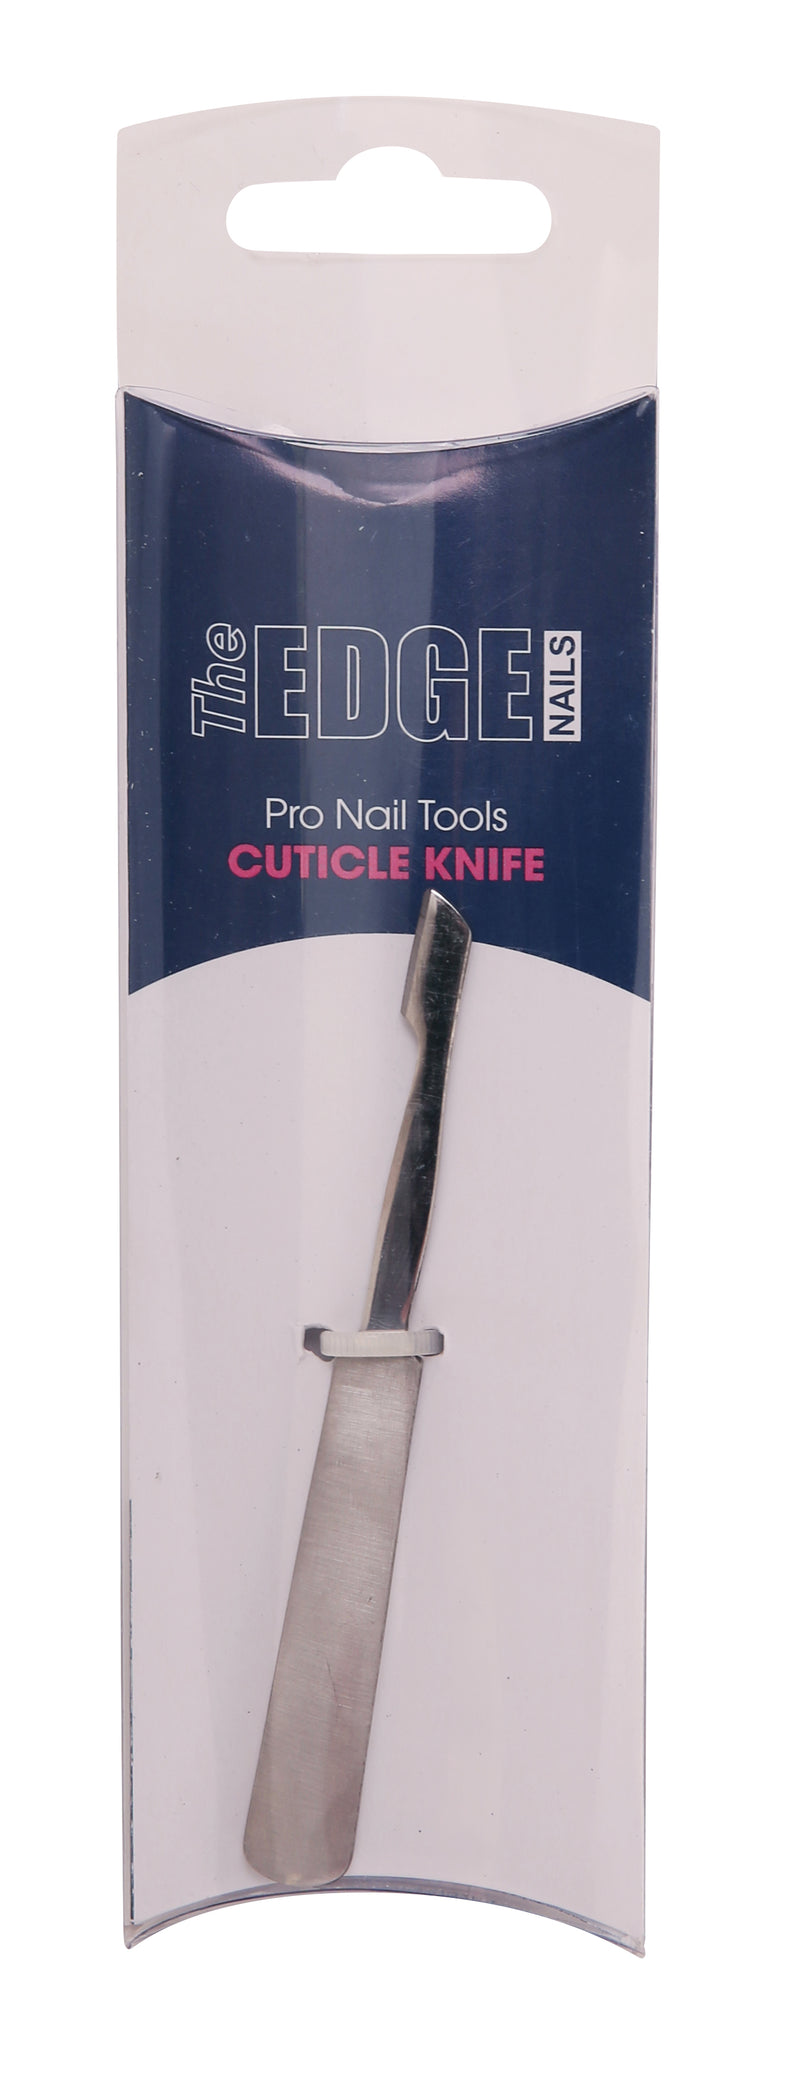 Stainless Steel Cuticle Knife